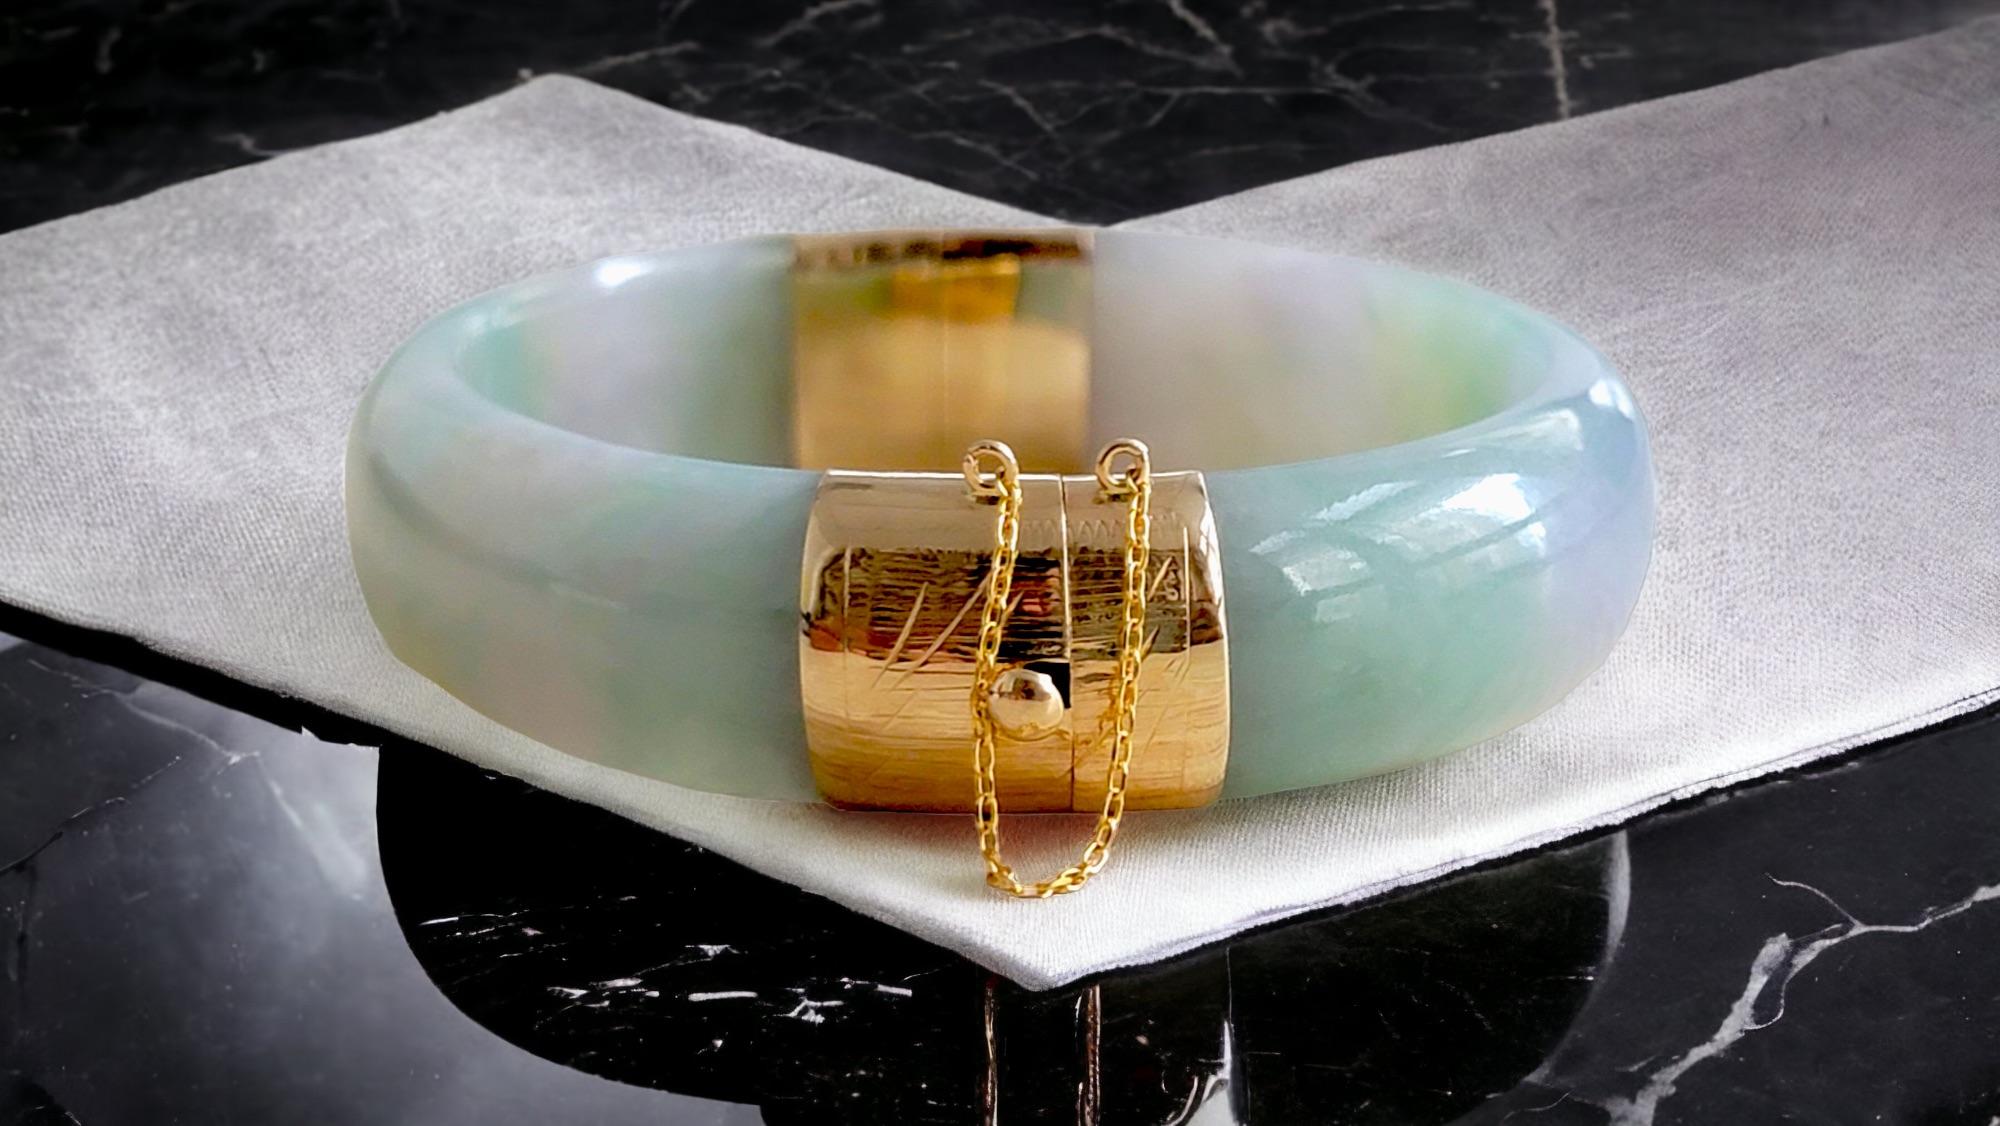 Using the best Handpicked untreated natural Jadeite from Burma, we created an authoritative and classy statement bangle bracelet. The 'Viceroy's Elliptical Burmese Jade Bangle Bracelet' uses an ergonomic ellipsis shape to fit one's wrists at an